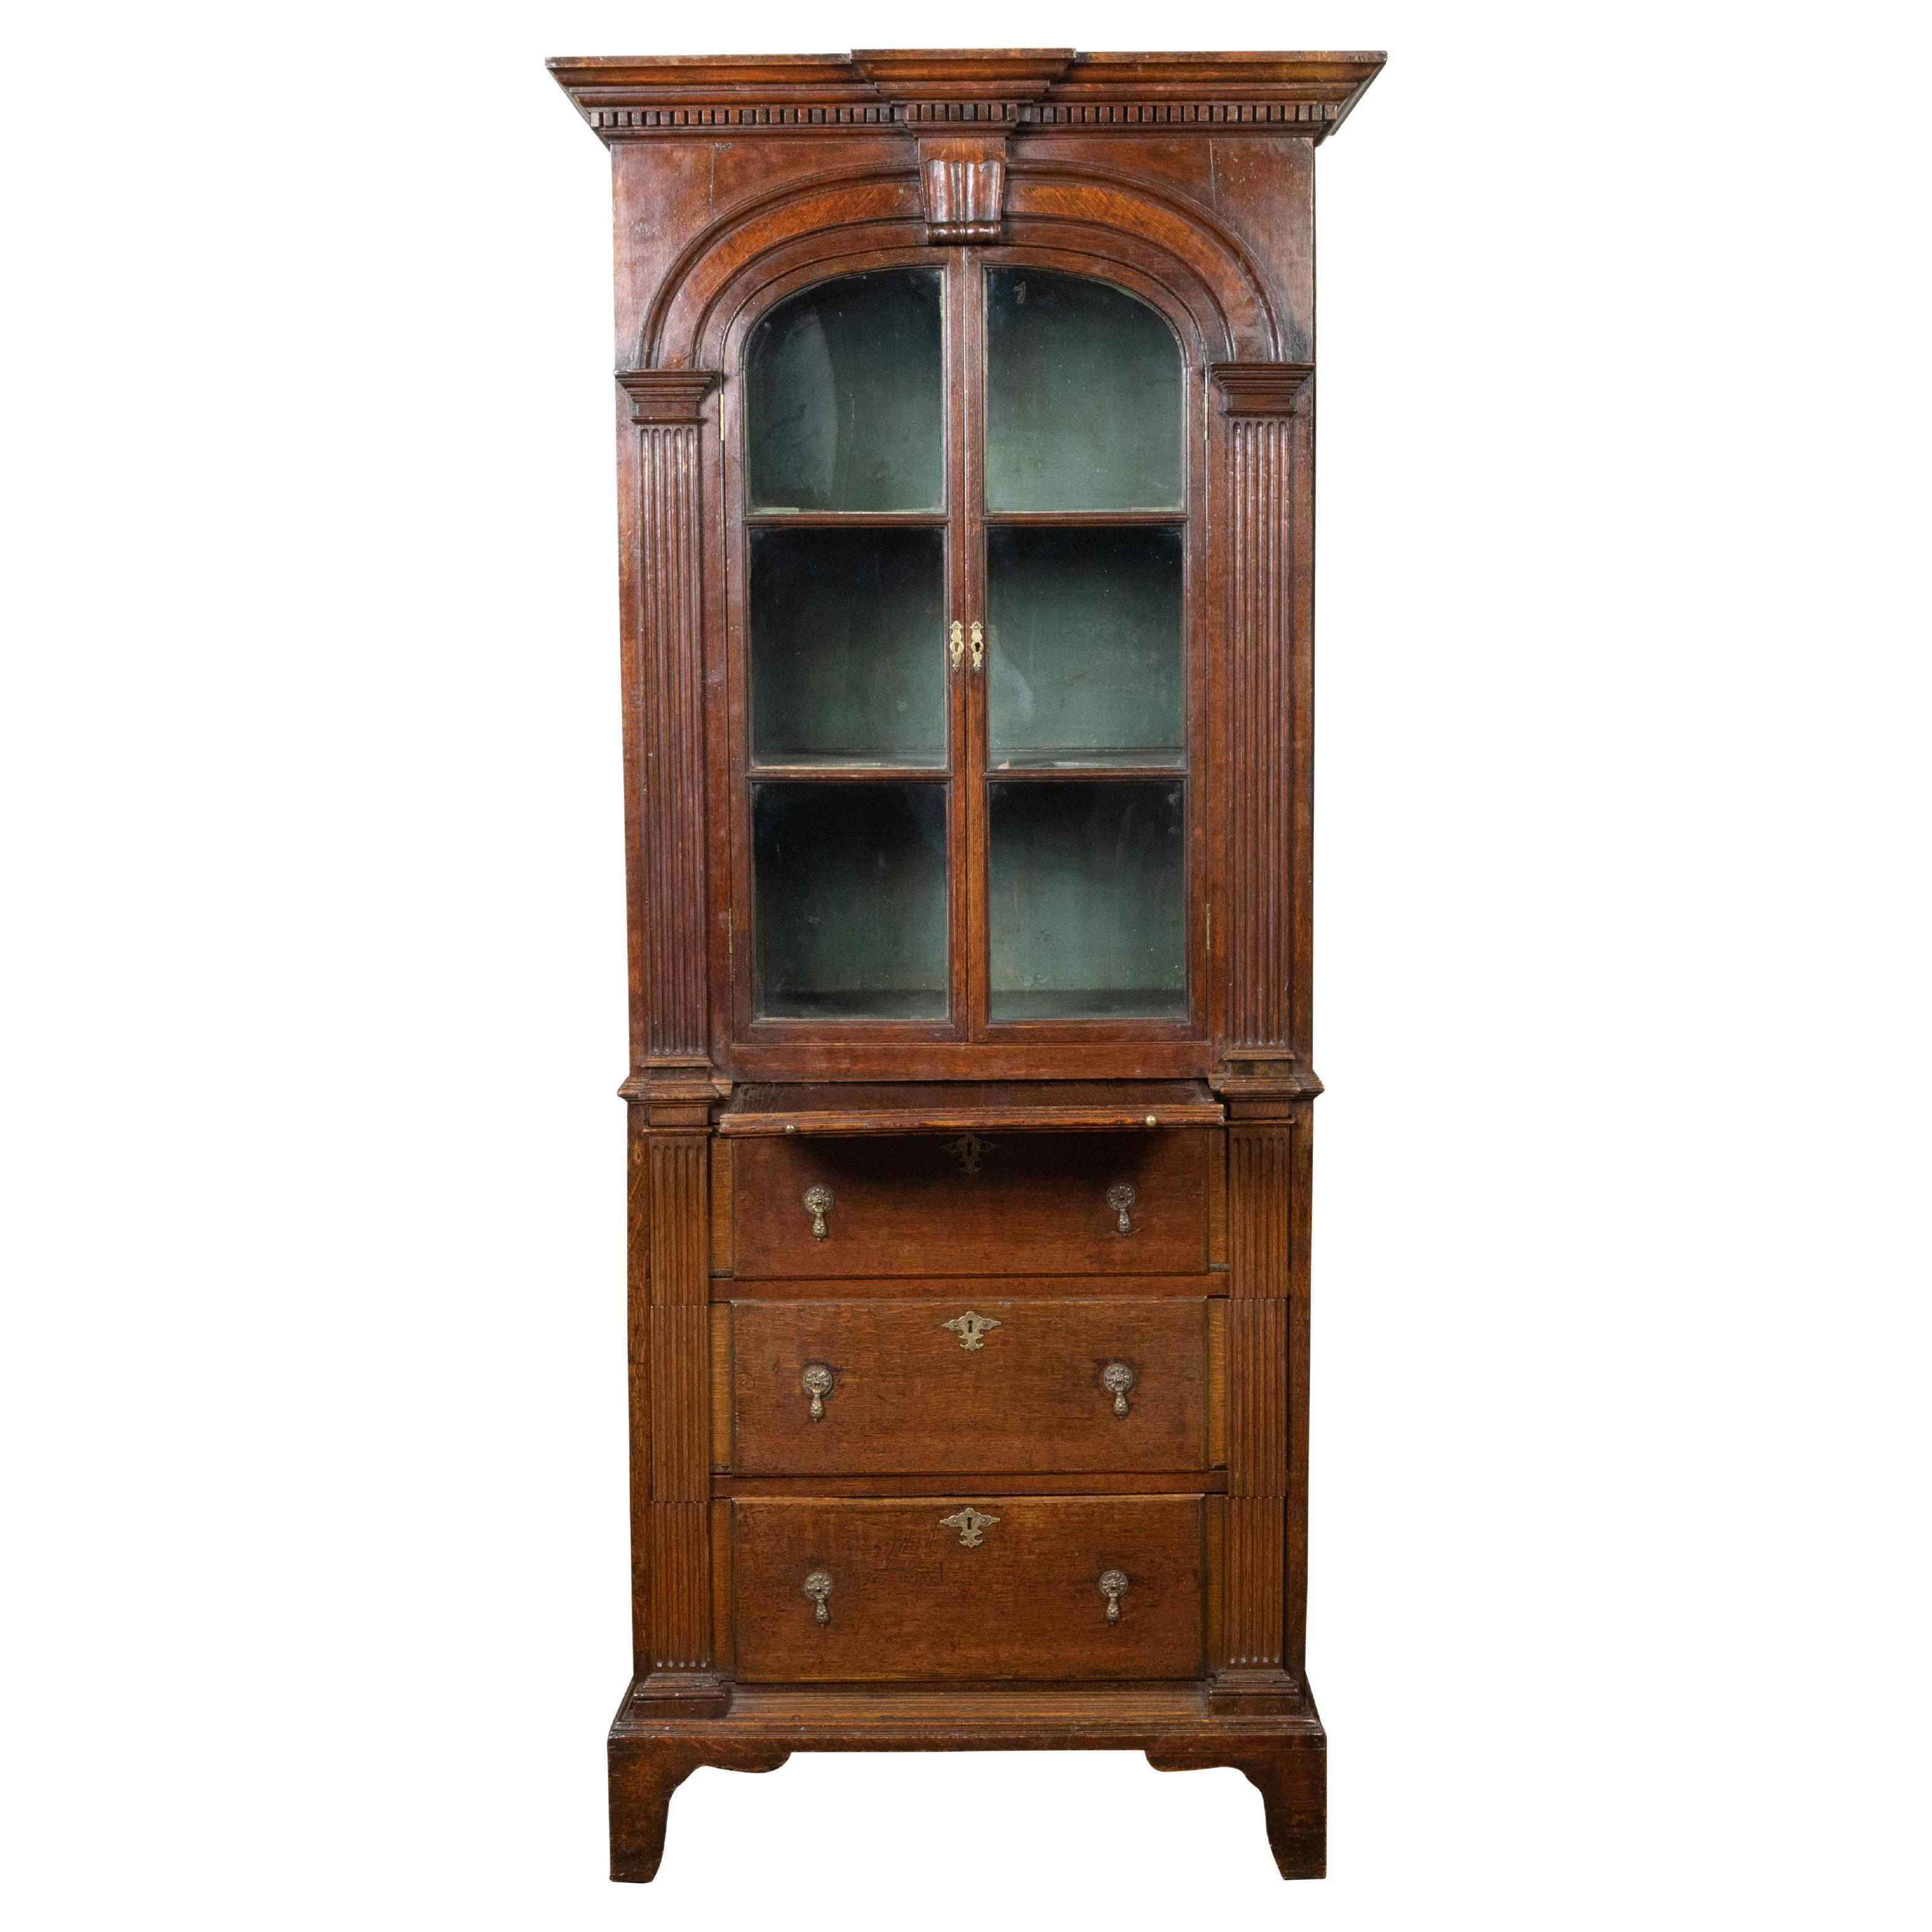 English 19th Century Oak Bookcase with Glass Doors, Drawers and Pilasters For Sale